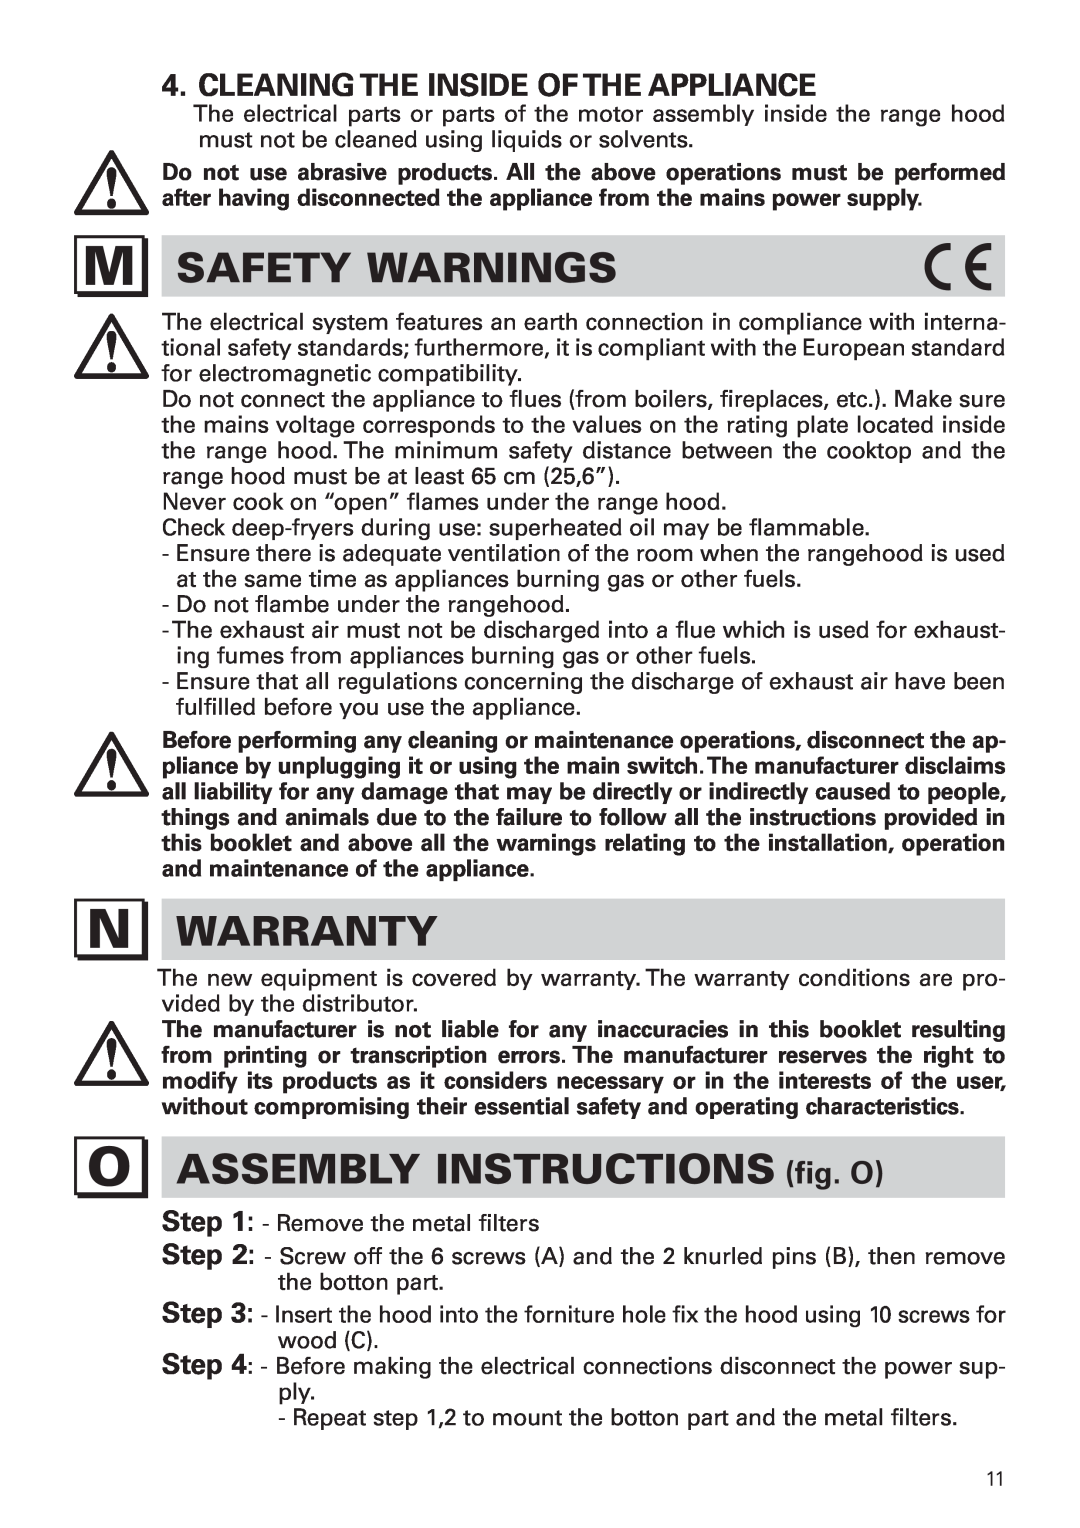 Bertazzoni KIN 36 PRO X M Safety Warnings, Warranty, ASSEMBLY INSTRUCTIONS fig. O, Cleaning The Inside Of The Appliance 